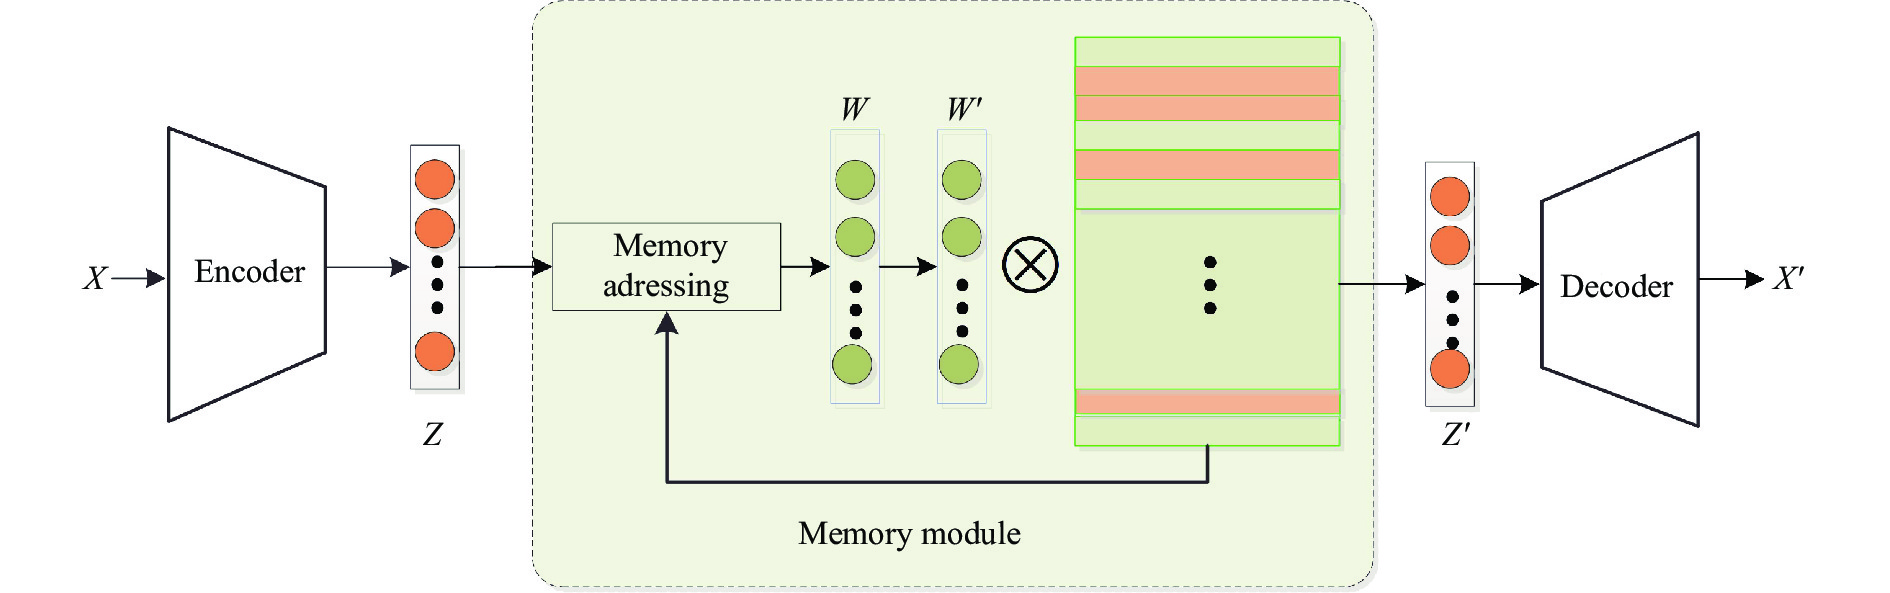 The flow chart of Memory AE based anomaly detection method